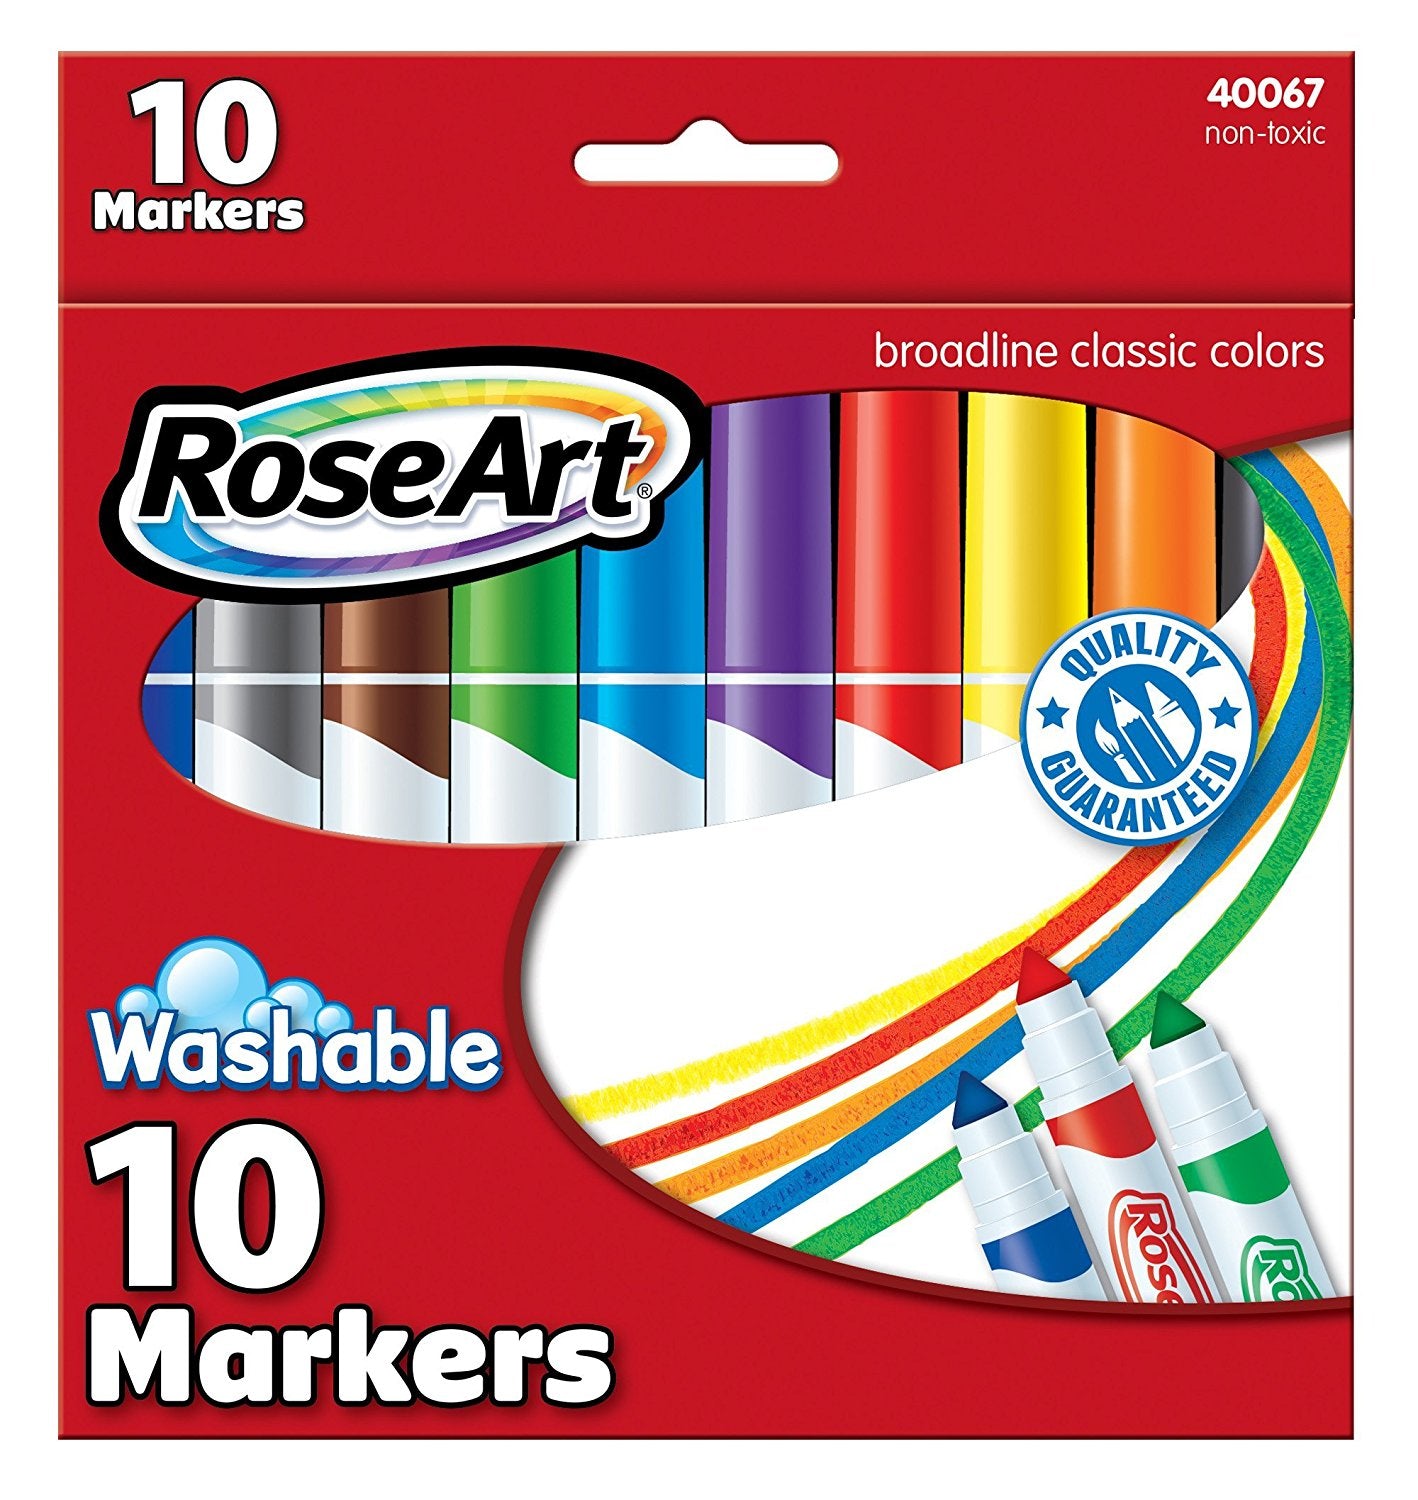 Mattel RoseArt Washable Classic Broadline Markers 10-Count Packaging May Vary DBN69